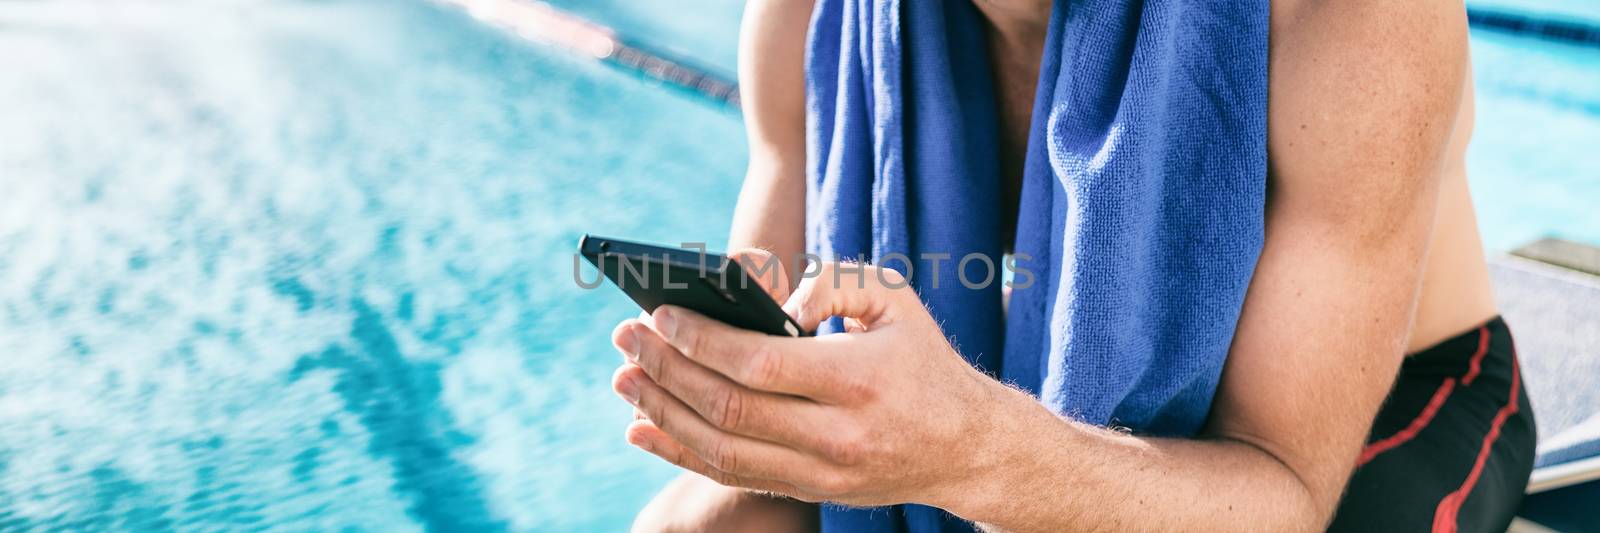 Swimmer athlete using mobile phone during triathlon race. Man at swimming pool texting sms message on cellphone training swim workout by Maridav